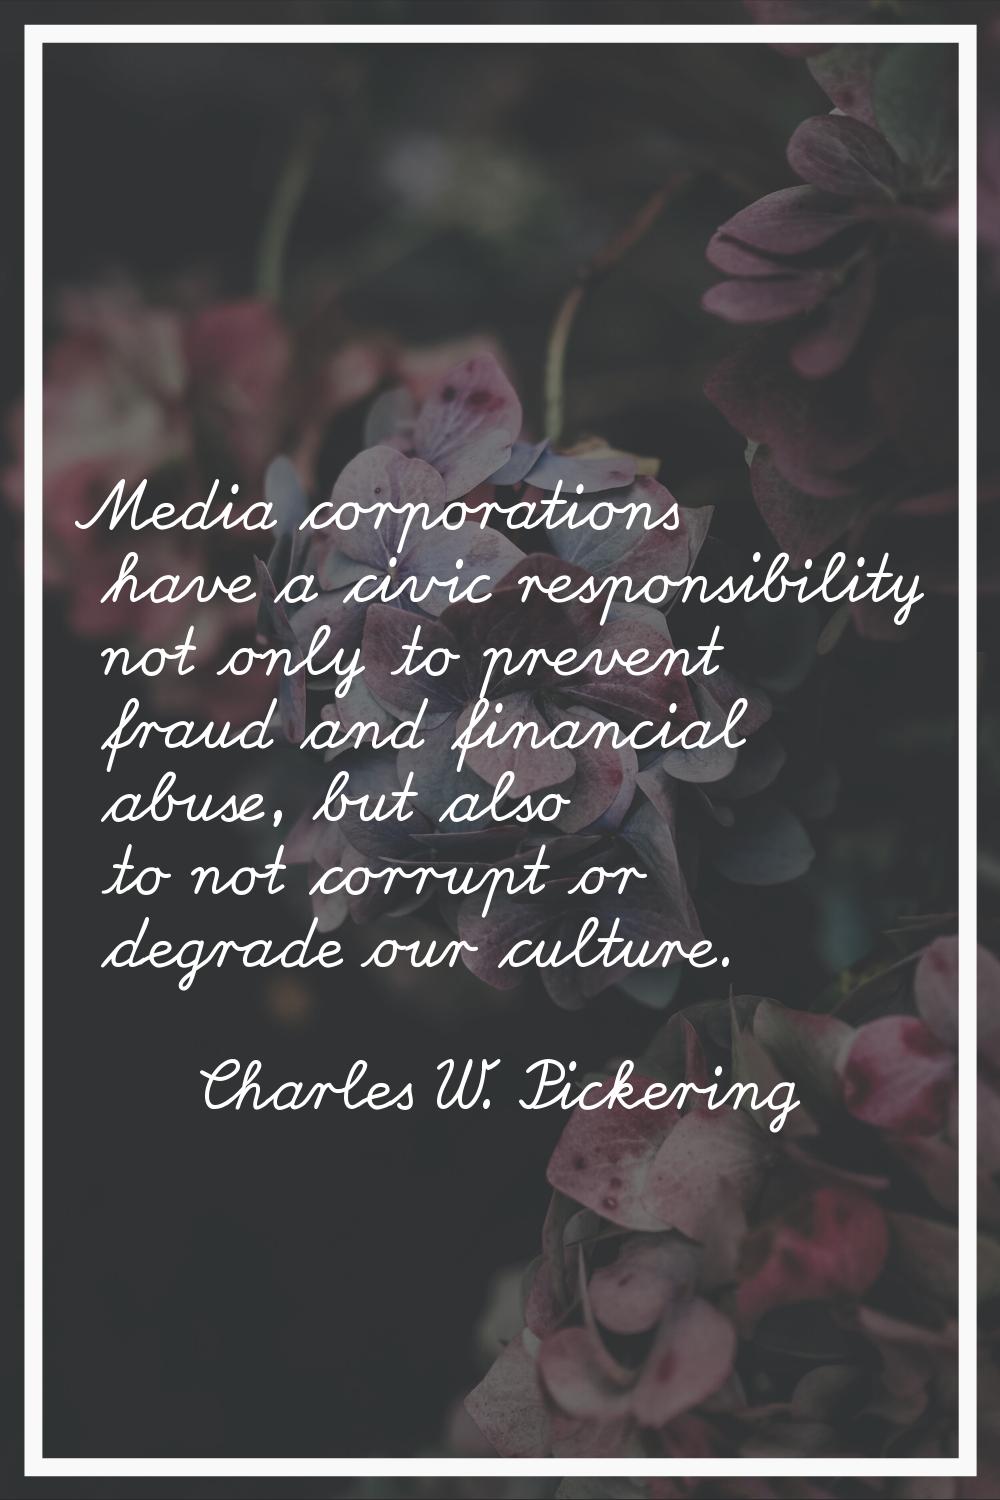 Media corporations have a civic responsibility not only to prevent fraud and financial abuse, but a